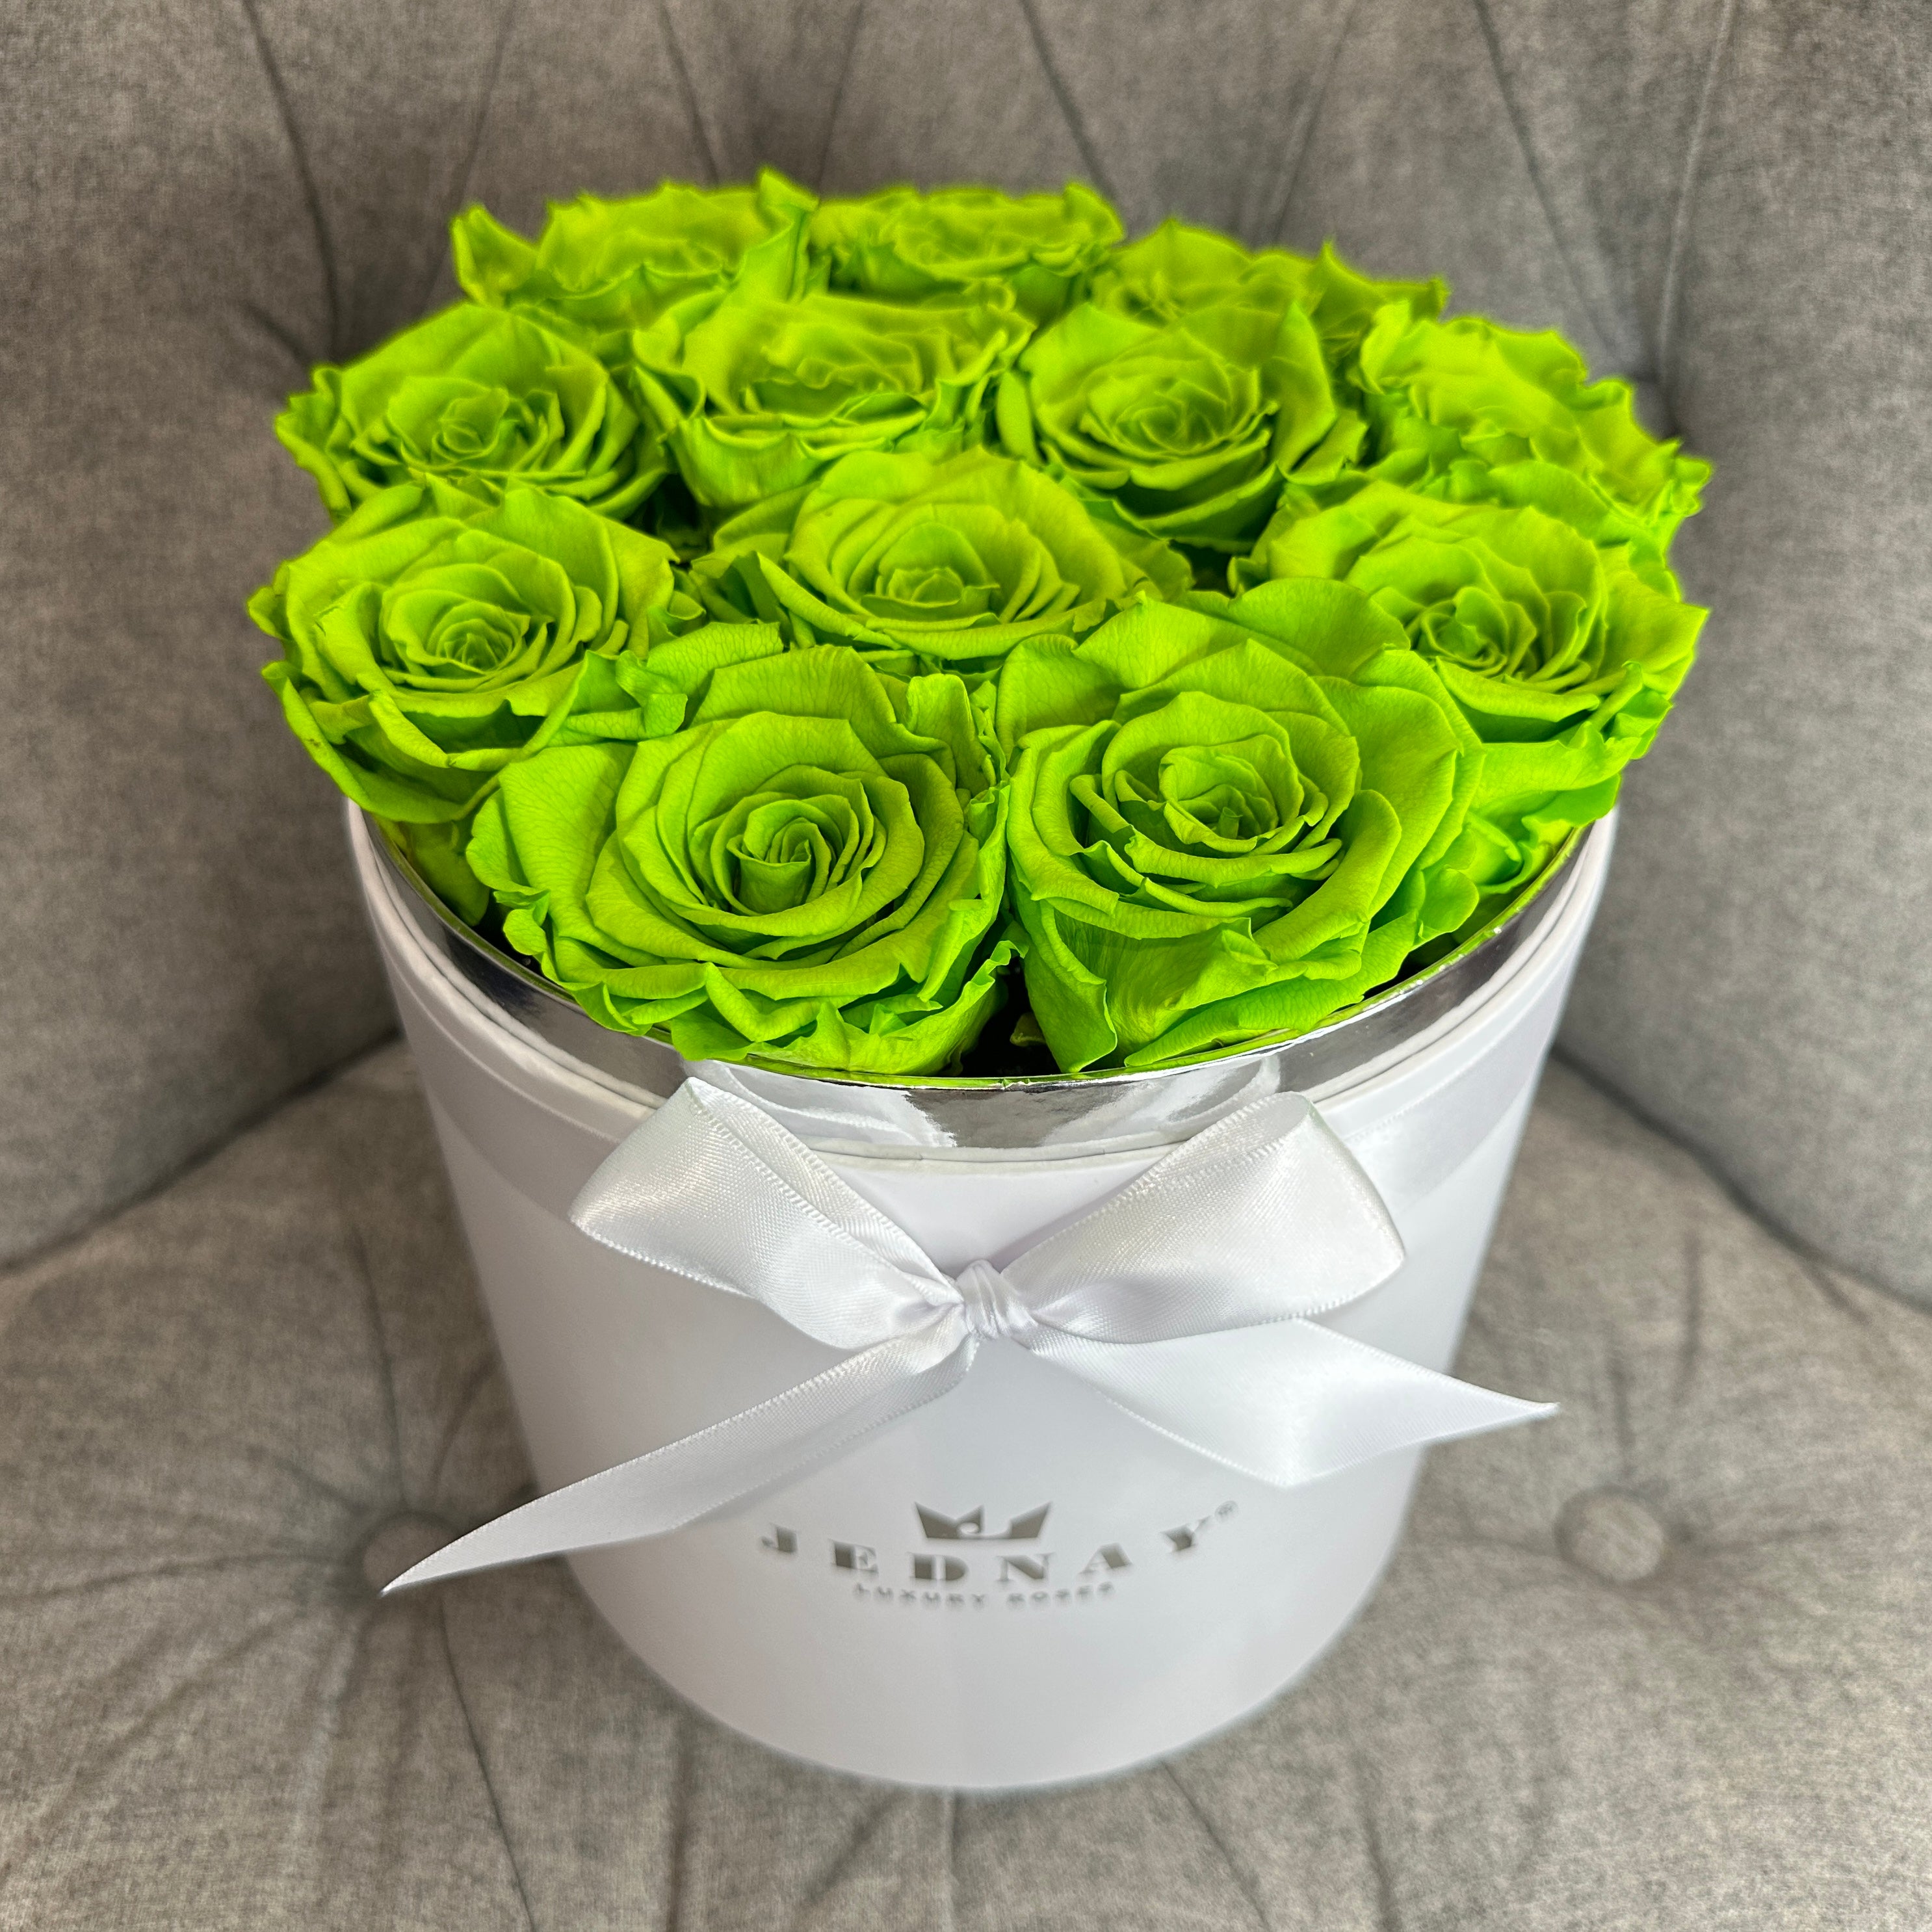 Lime green forever roses in a large white gift box by Jednay 